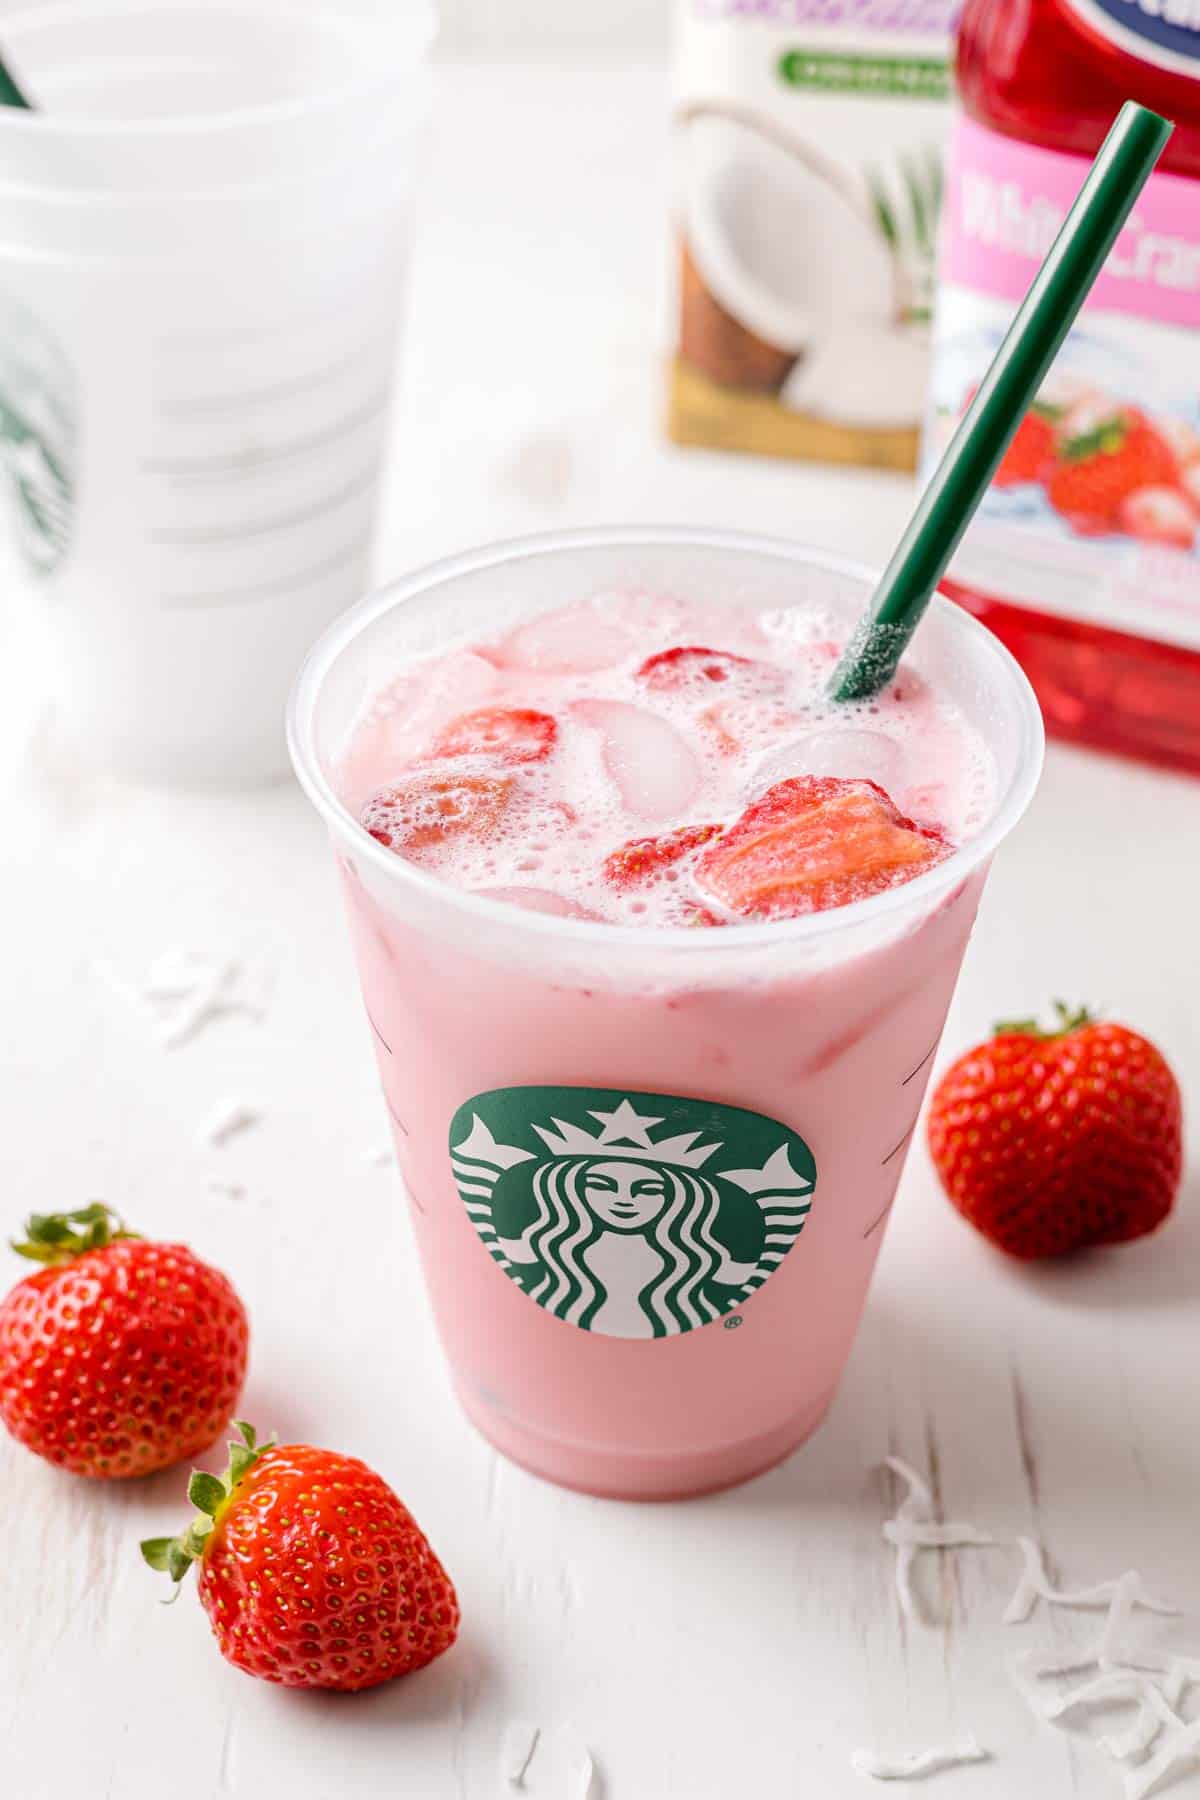 Starbucks copycat pink drink in a Starbucks cup with a green straw next to fresh strawberries.